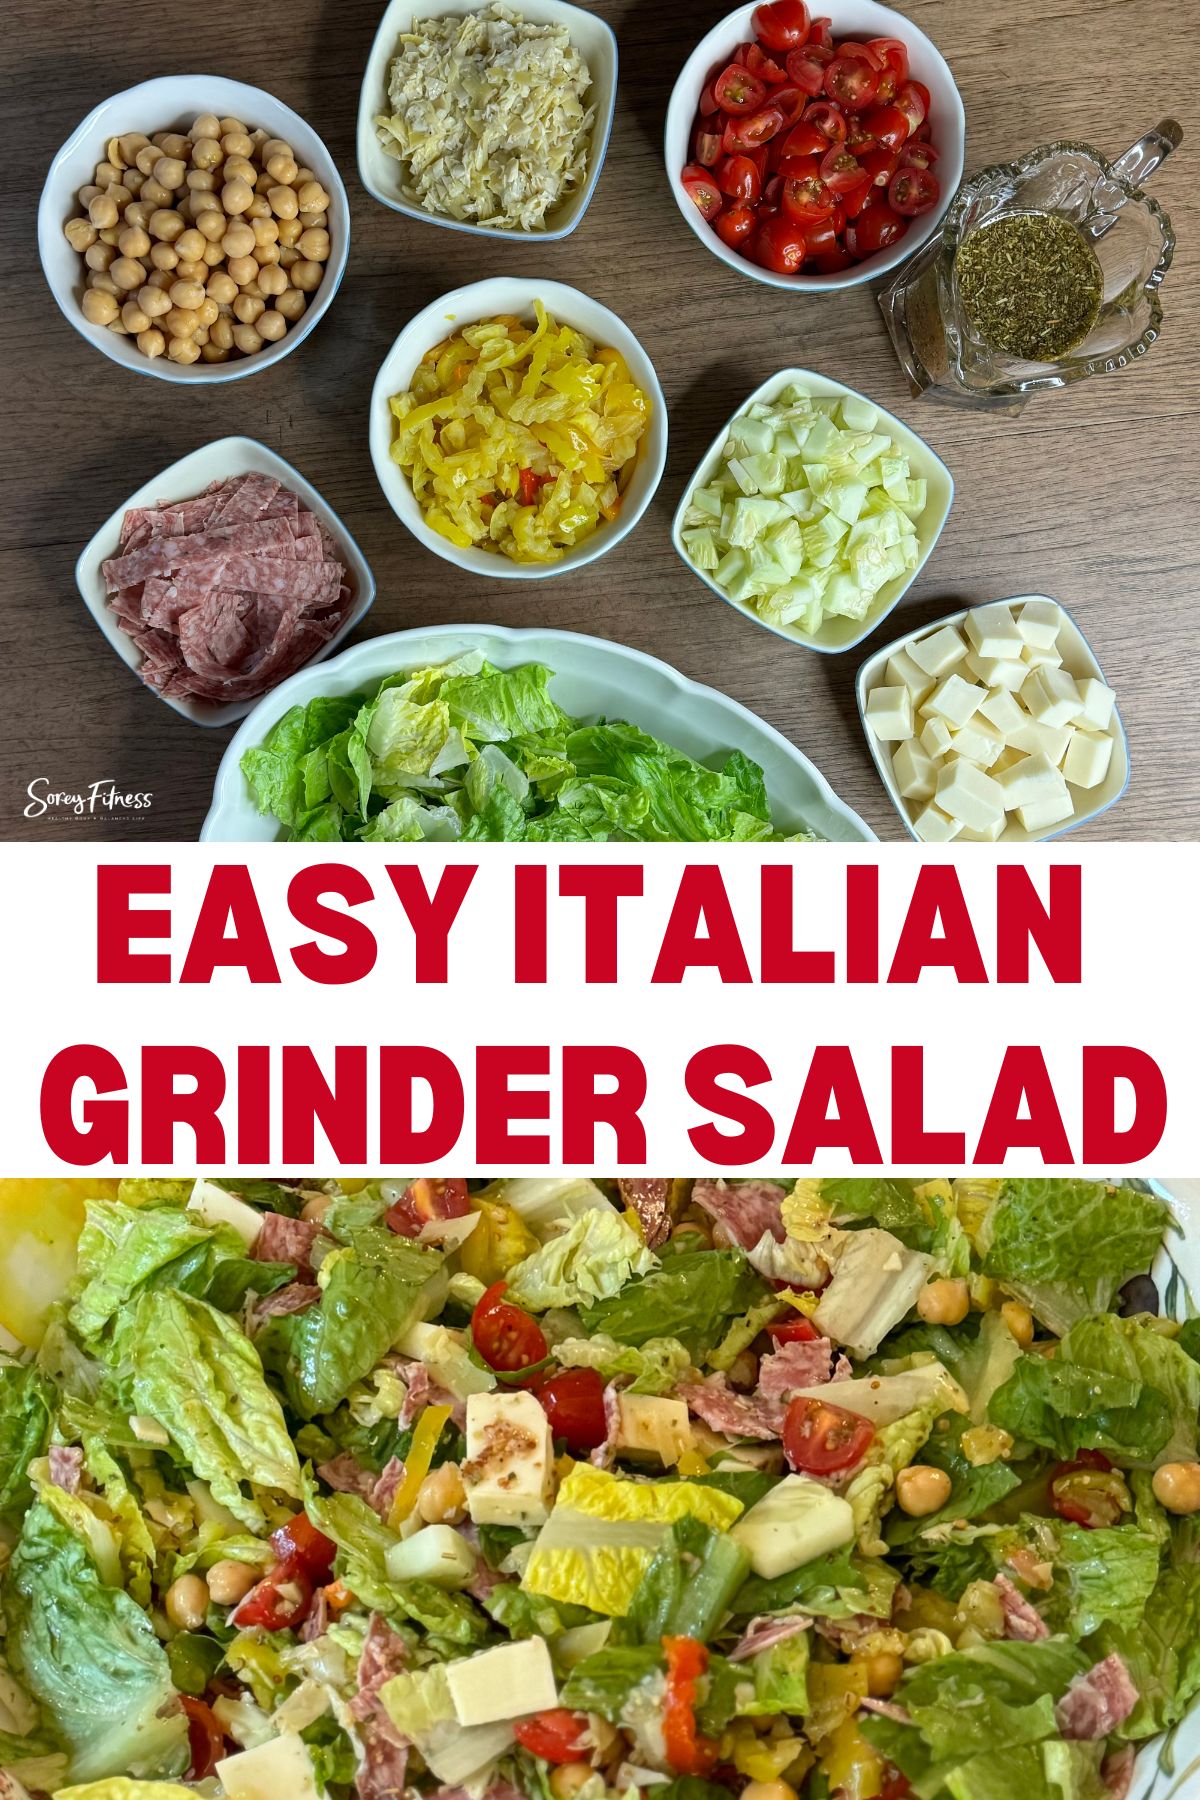 collage of the ingredients and finished salad recipe - text overlay says easy Italian grinder salad